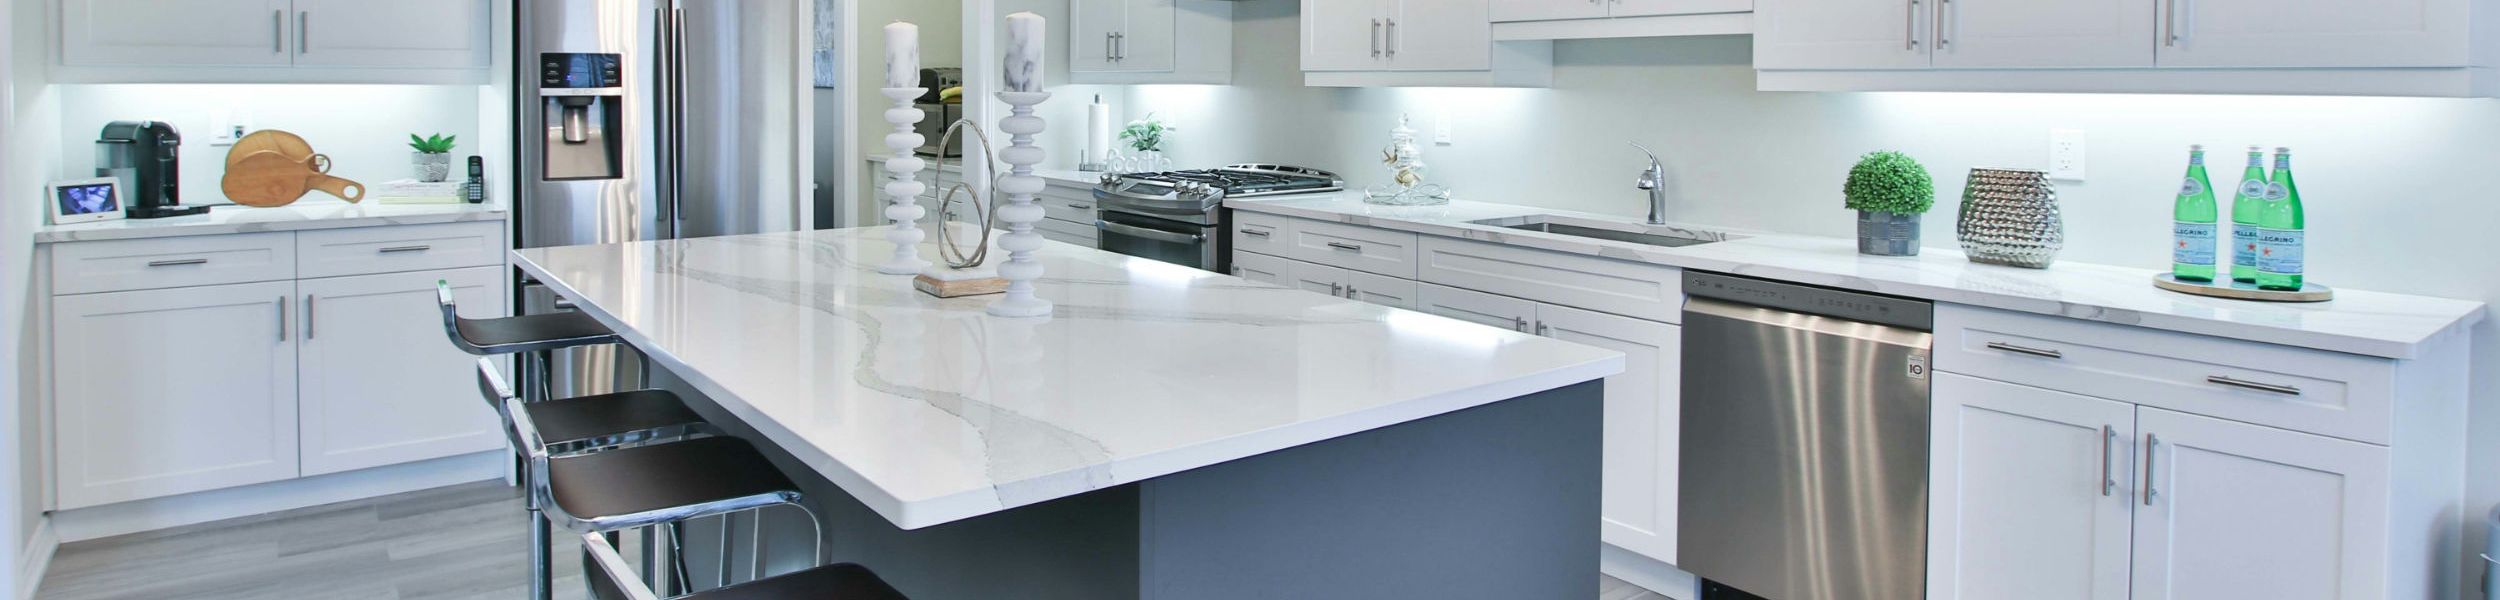 This kitchen features a very light marble countertop with light colored bands.